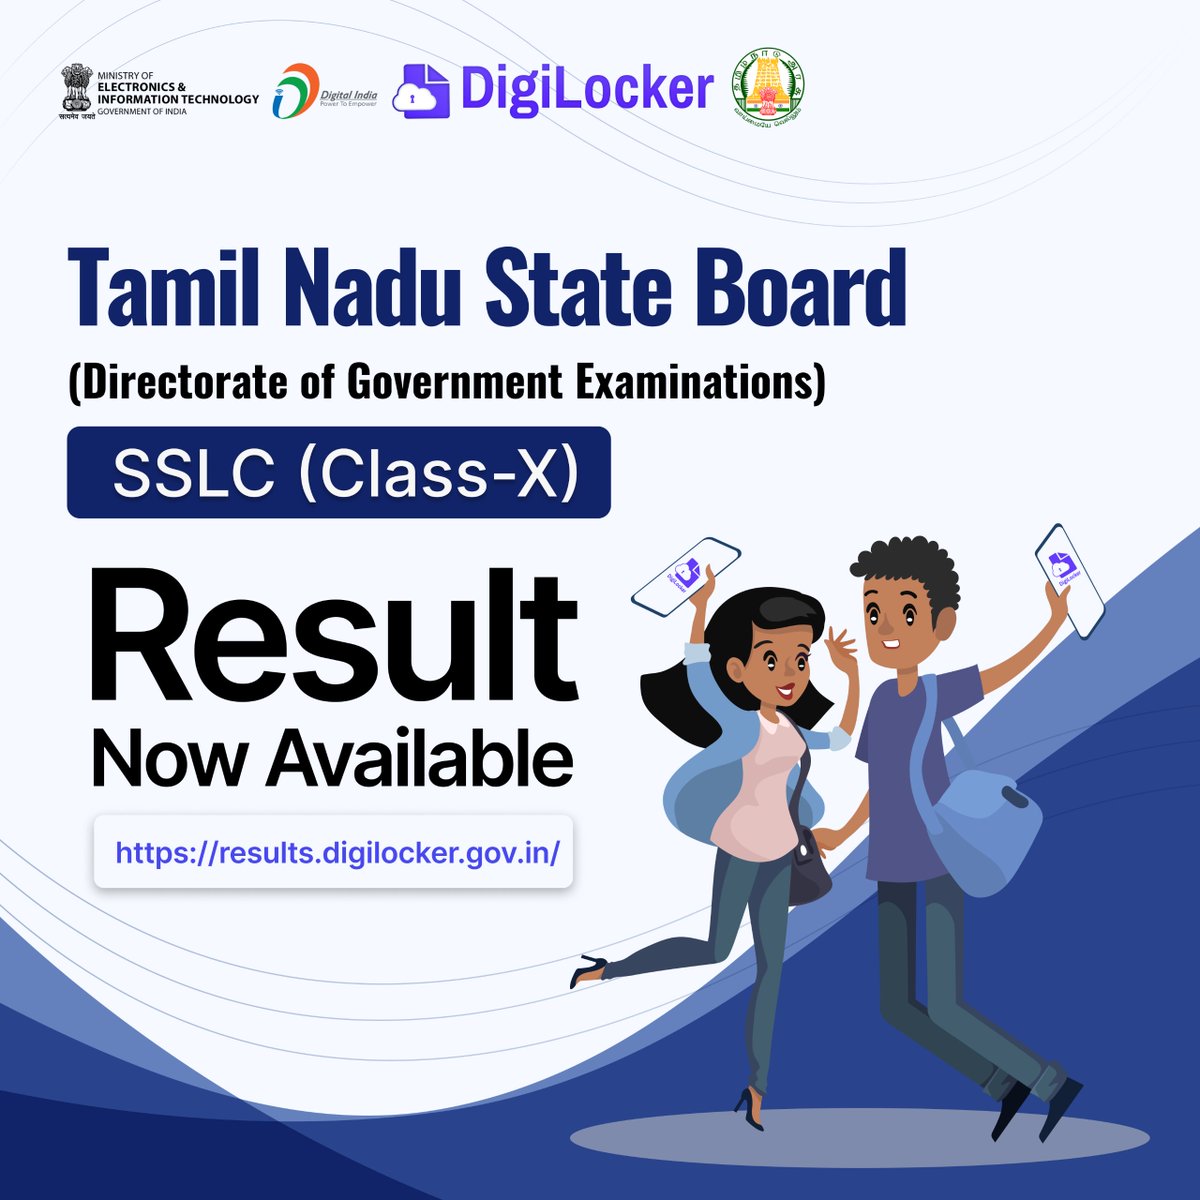 ✨Tamil Nadu State Board (Directorate of Government Examinations) #SSLC (Class-X) Result is now available on #DigiLocker Results Page - results.digilocker.gov.in Congratulations to all the students on their achievements. #DigitalIndia #TamilNadu @digilocker_ind